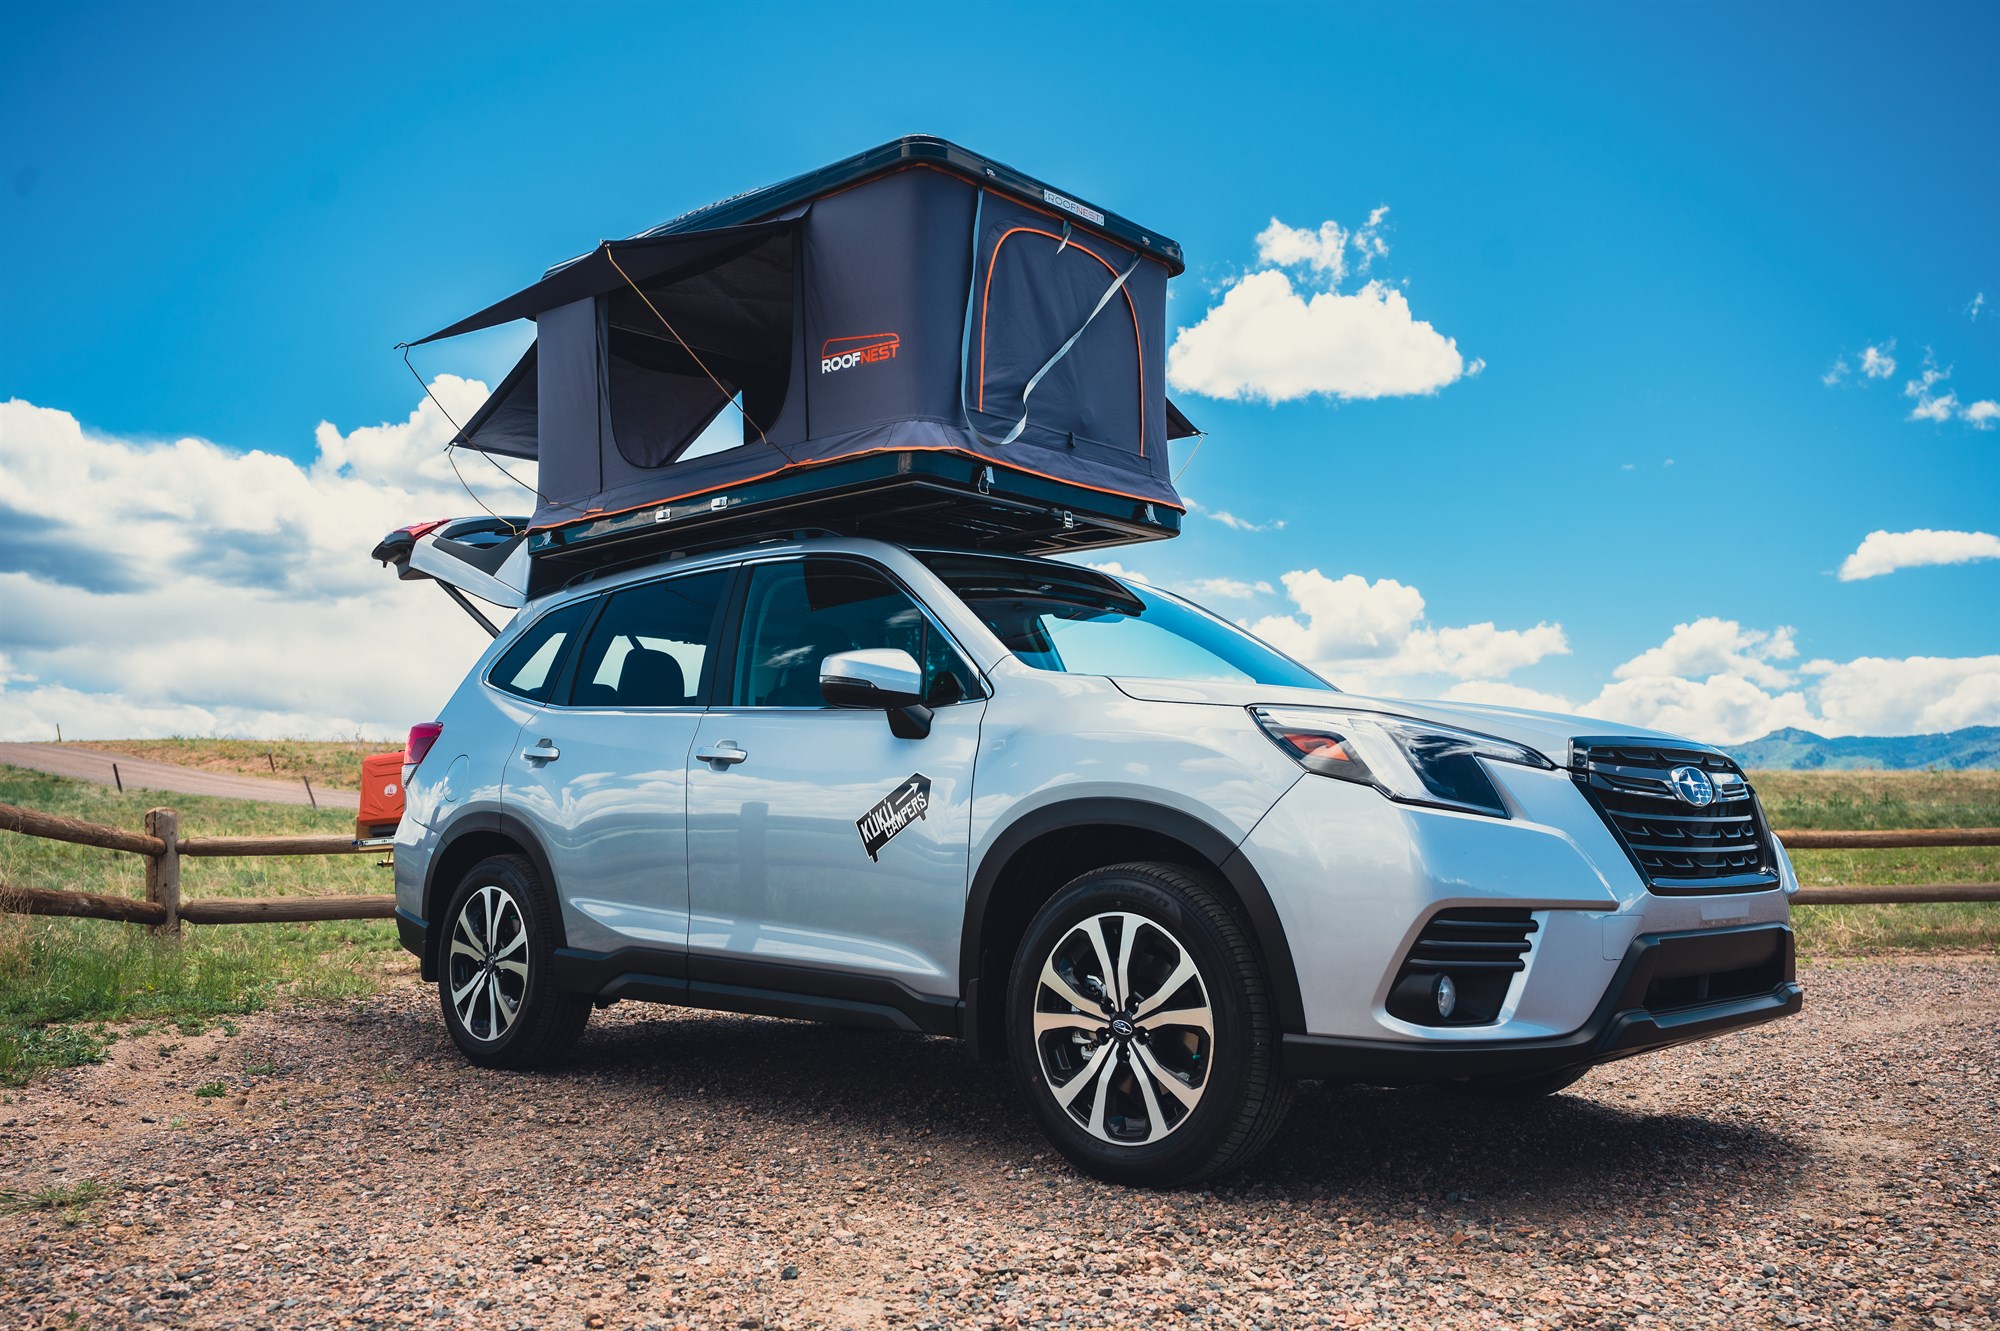 Picture of Subaru Forester with Roof Top Tent